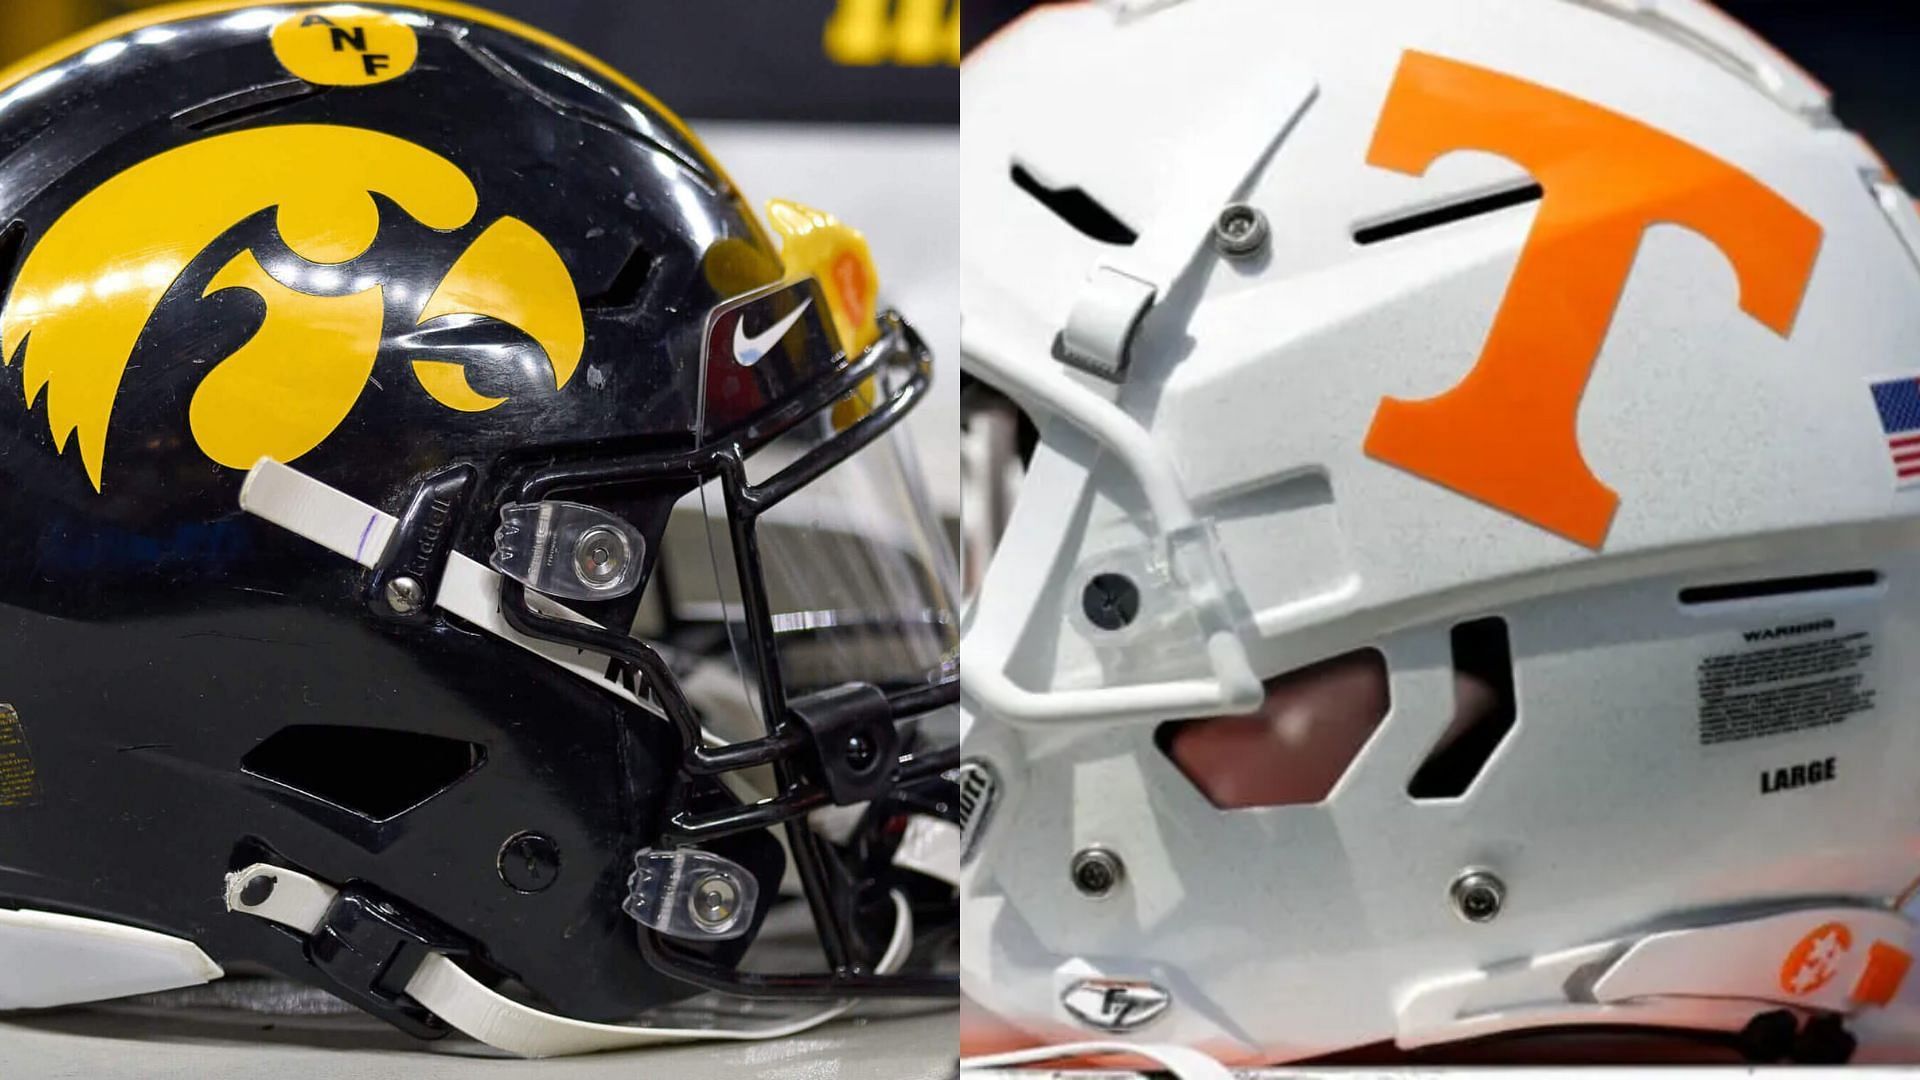 The Iowa Hawkeyes and the Tennessee Volunteers will face off in the Cheez-It Citrus Bowl. (Image credit: Robin Alam and Streeter Lecka/Getty Images)